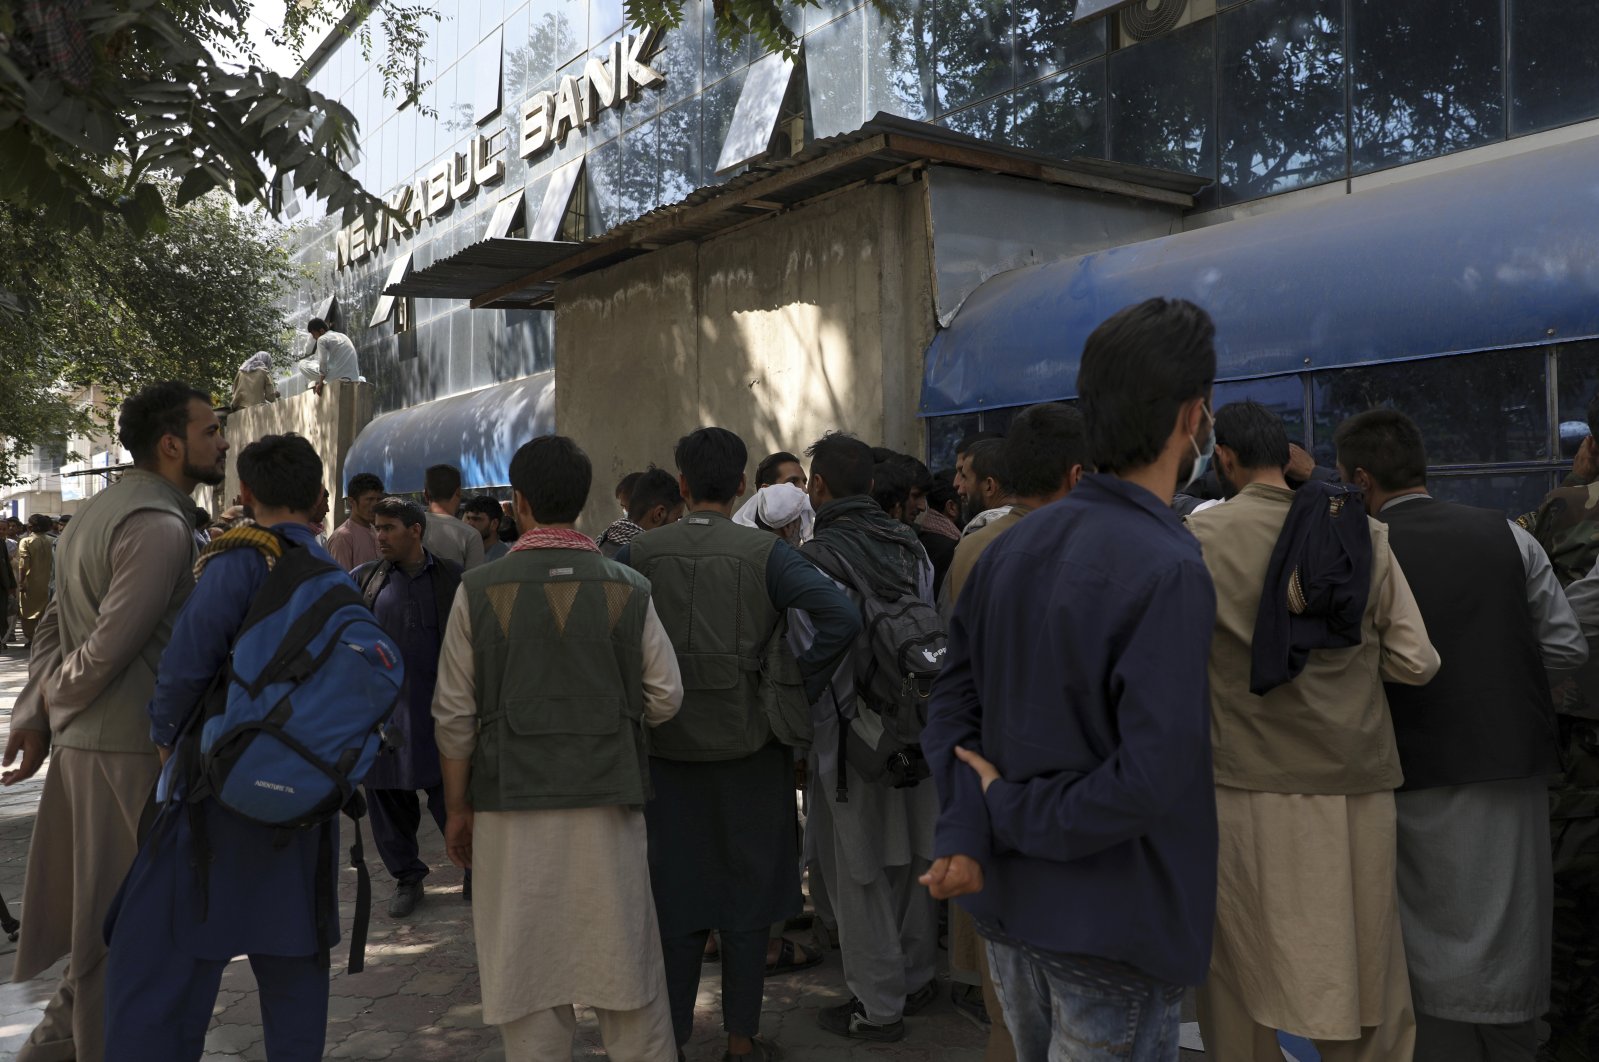 Afghans wait in long lines for hours to try to withdraw money in front of a bank in Kabul, Afghanistan, Sunday, Aug. 15, 2021. (AP Photo)